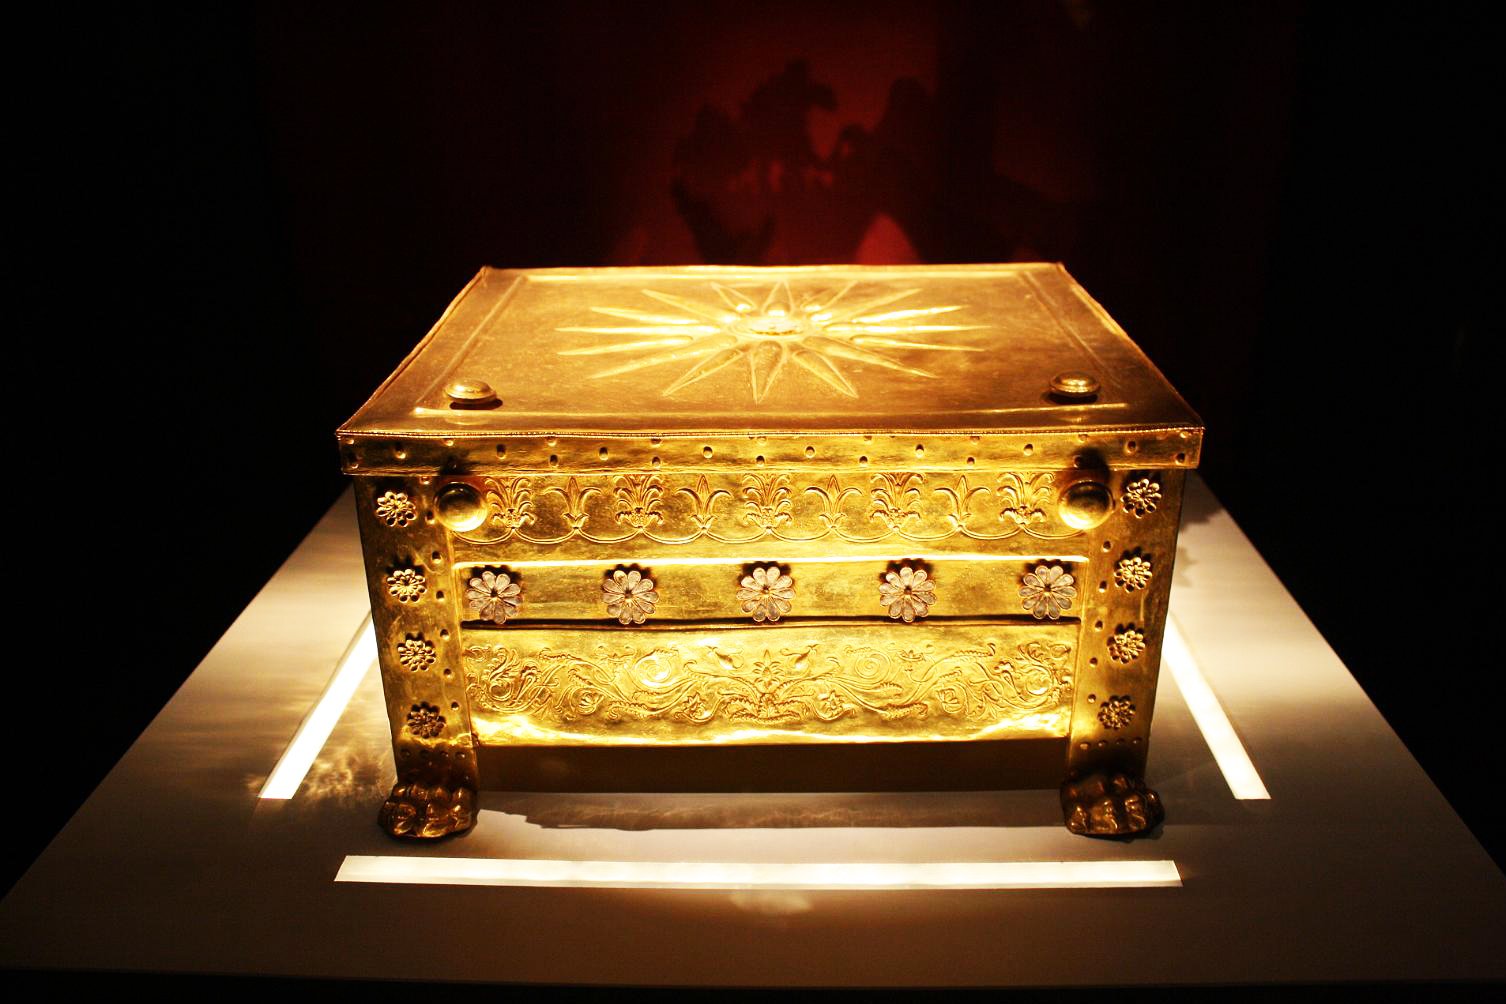 How to watch the golden coffin of Philip II in Thessaloniki